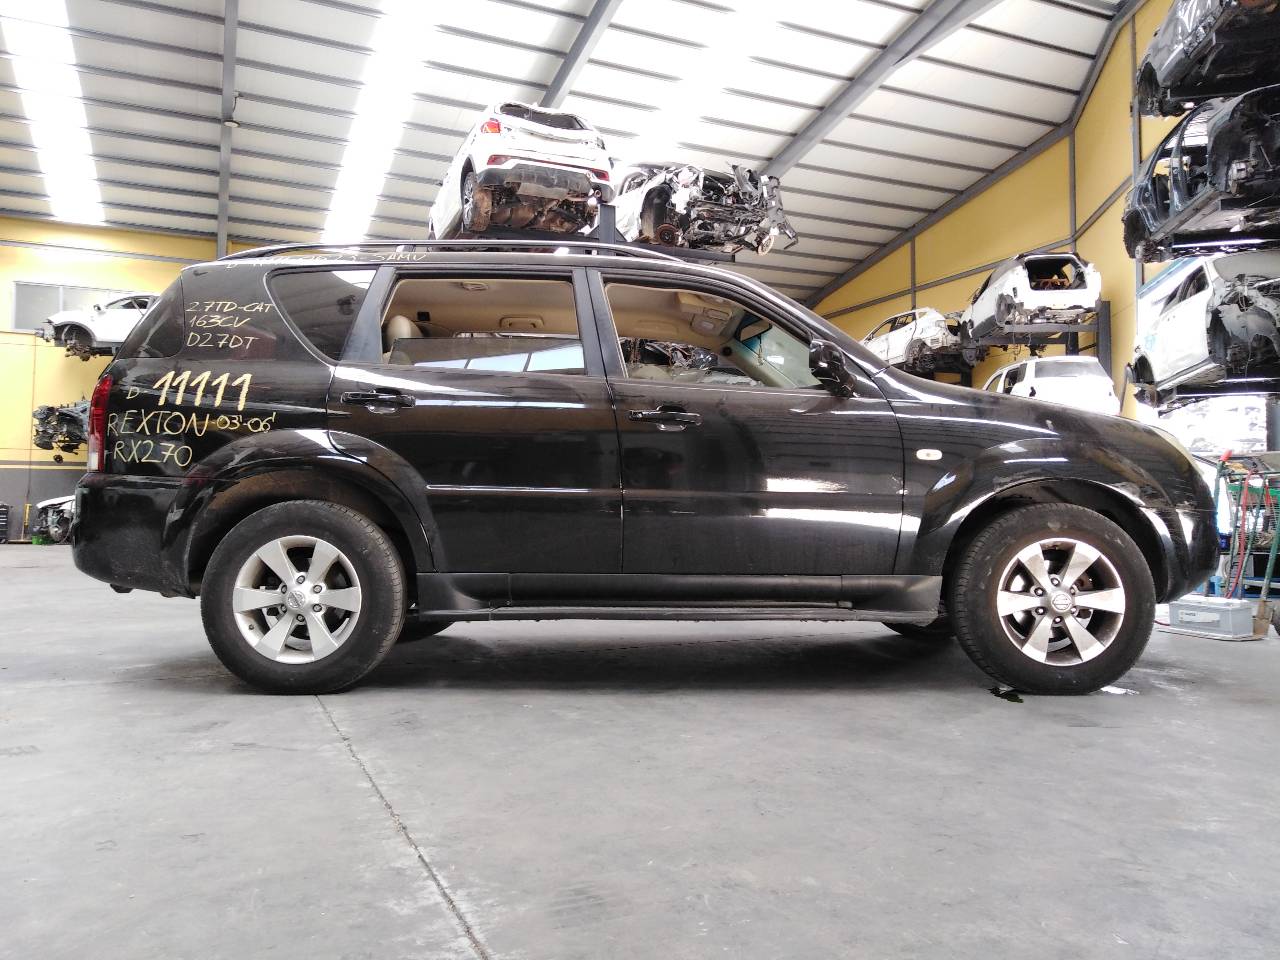 SSANGYONG Rexton Y200 (2001-2007) Engine D27DT 21825225